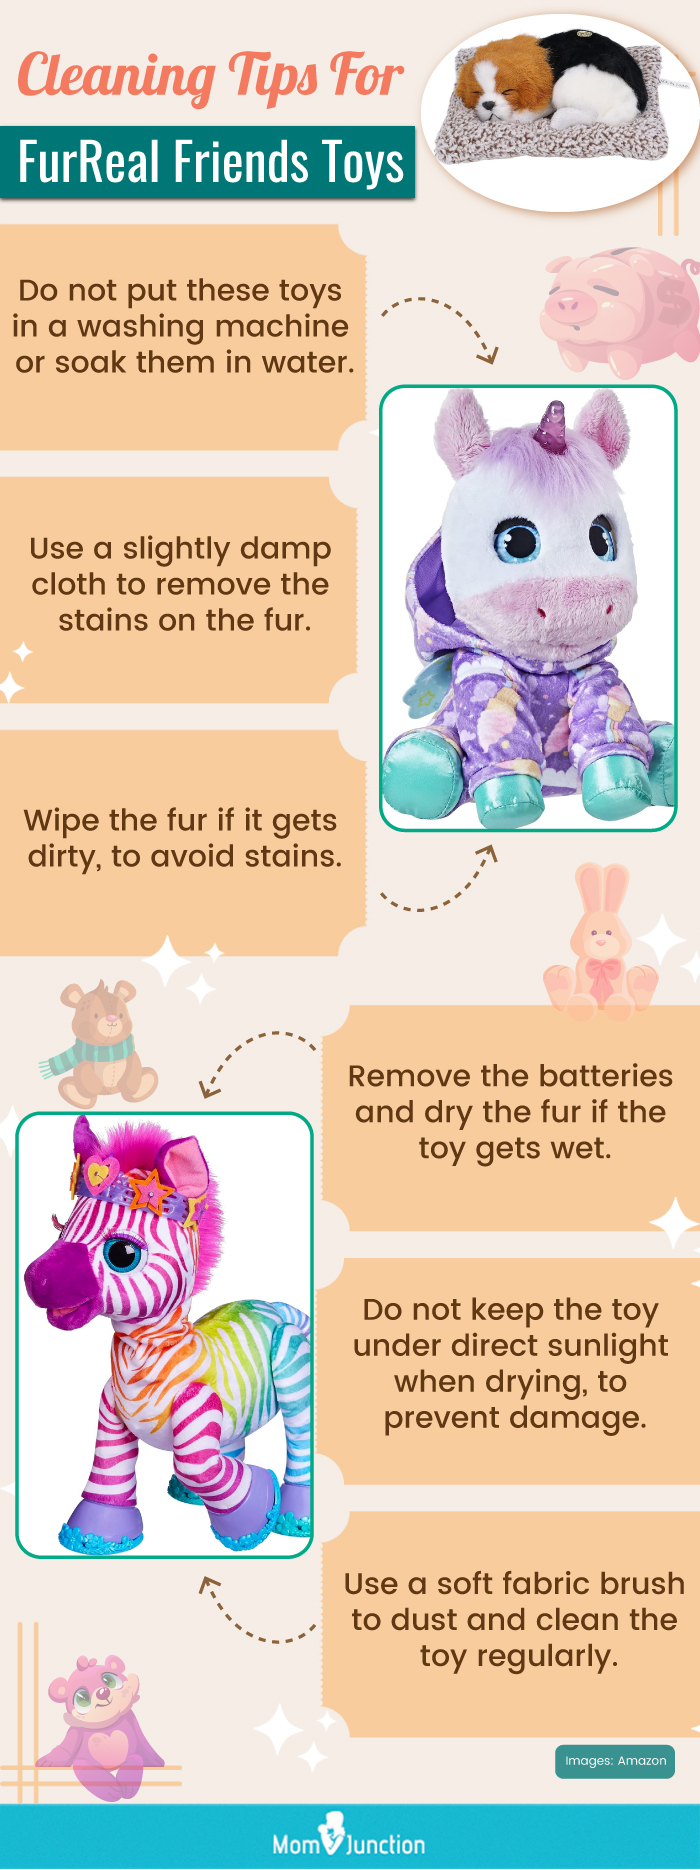 Cleaning Tips For FurReal Friends Toys (infographic)